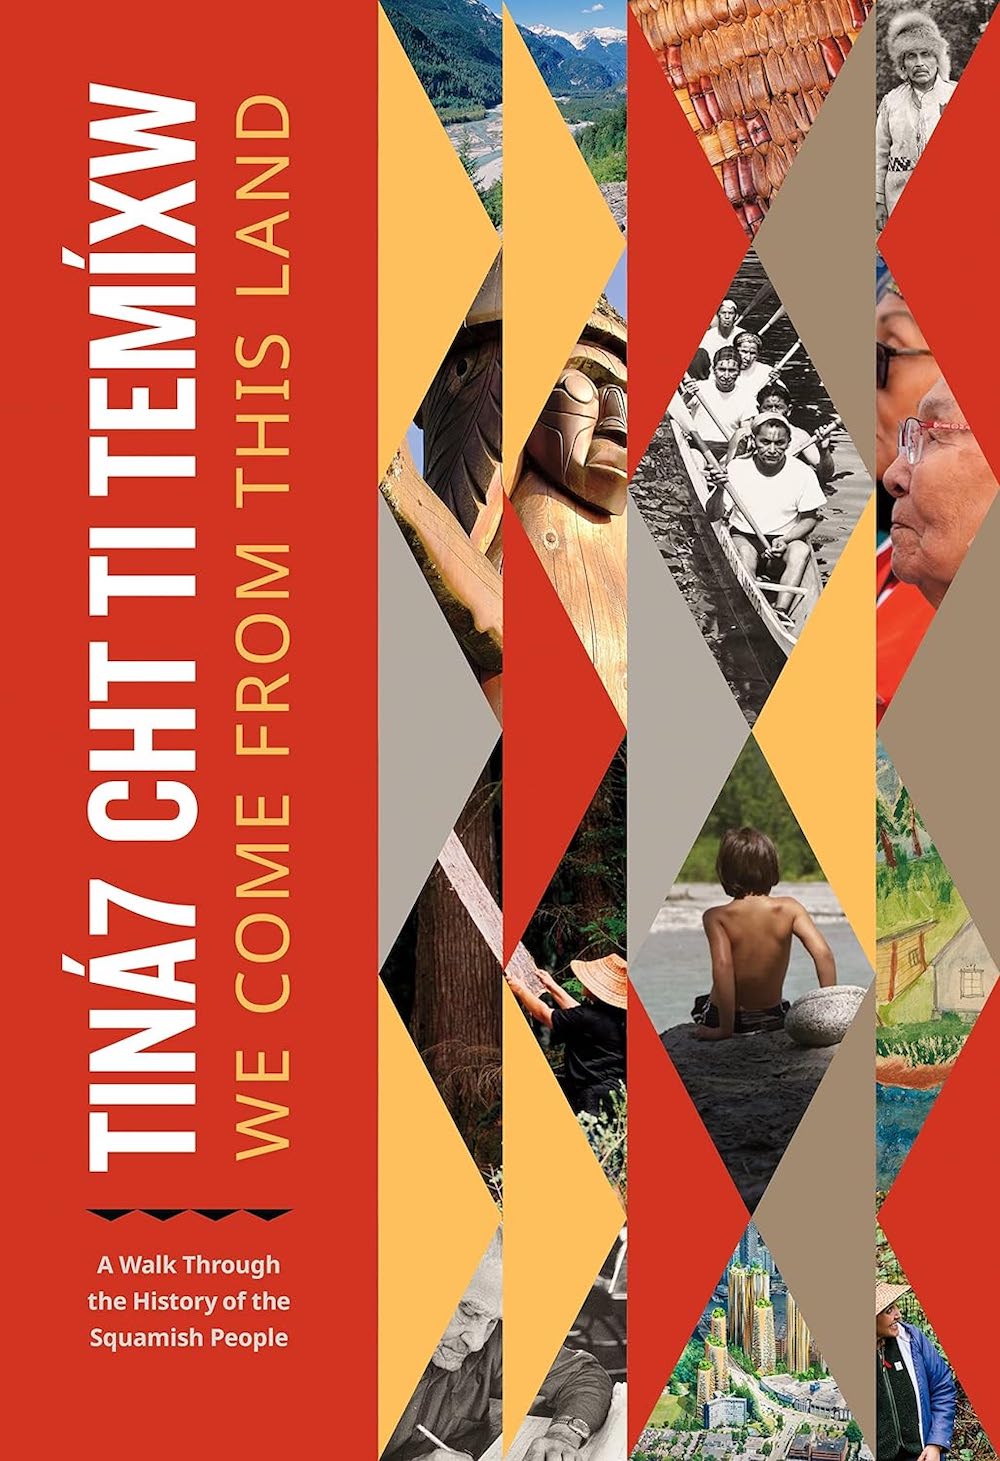 The cover of 'tiná7 cht ti temíxw (We Come from This Land),' which features the title in vertical letters on the left and a collage of images behind a geometric pattern on the right, with black and white photos of paddlers and Elders and colour photos of West Coast landscapes.